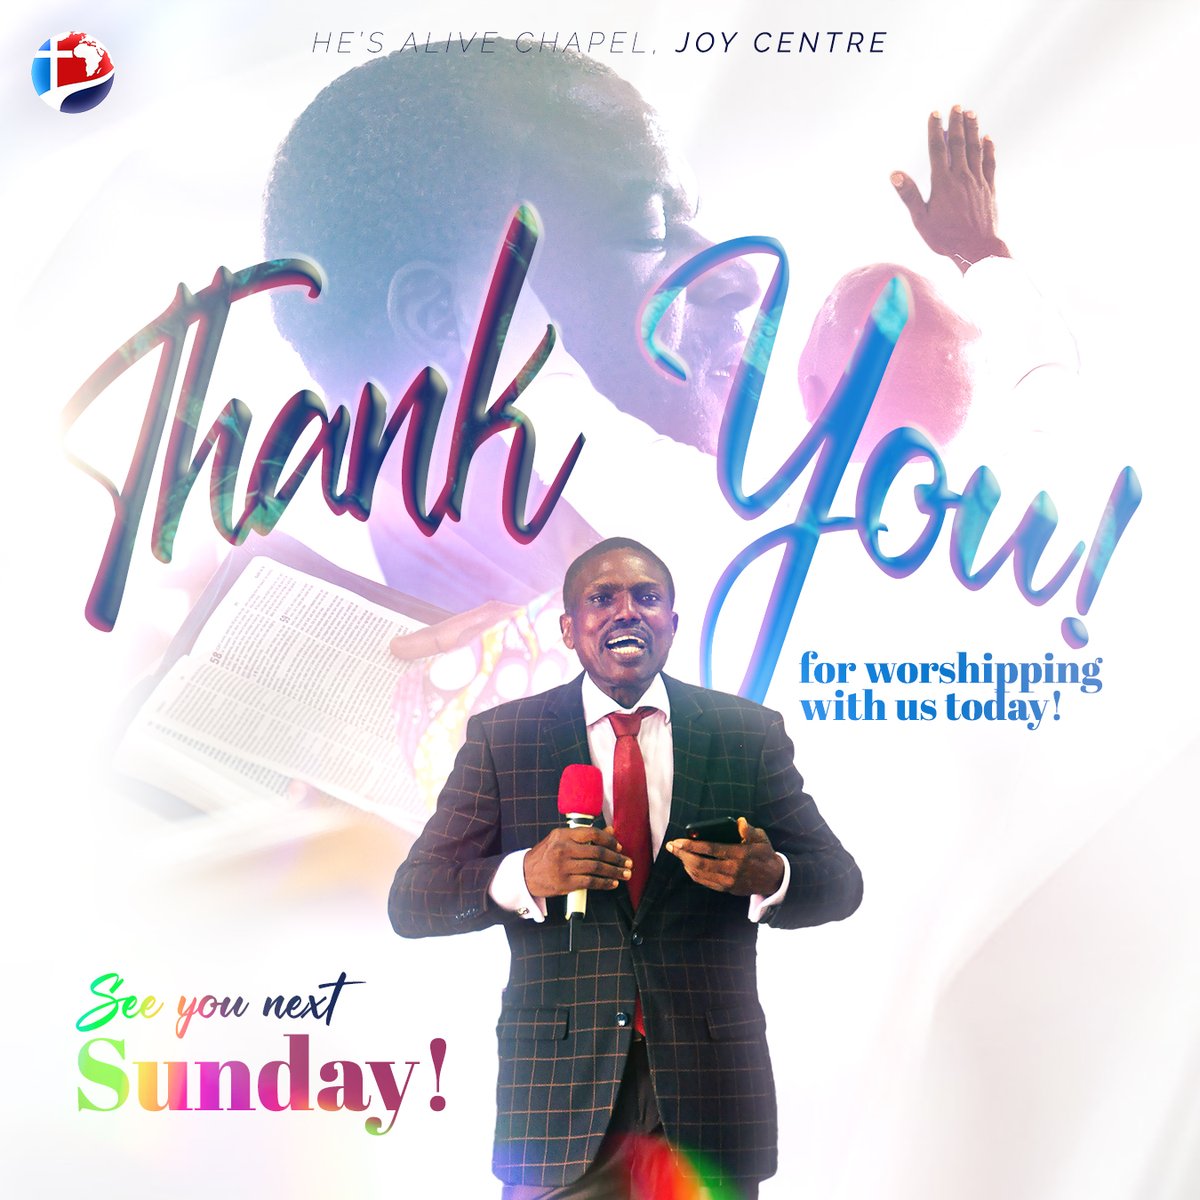 Have a blessed week ahead, filled with the goodness and grace of God!🙏🏽

We look forward to having you worship with us once again next Sunday!😊❤